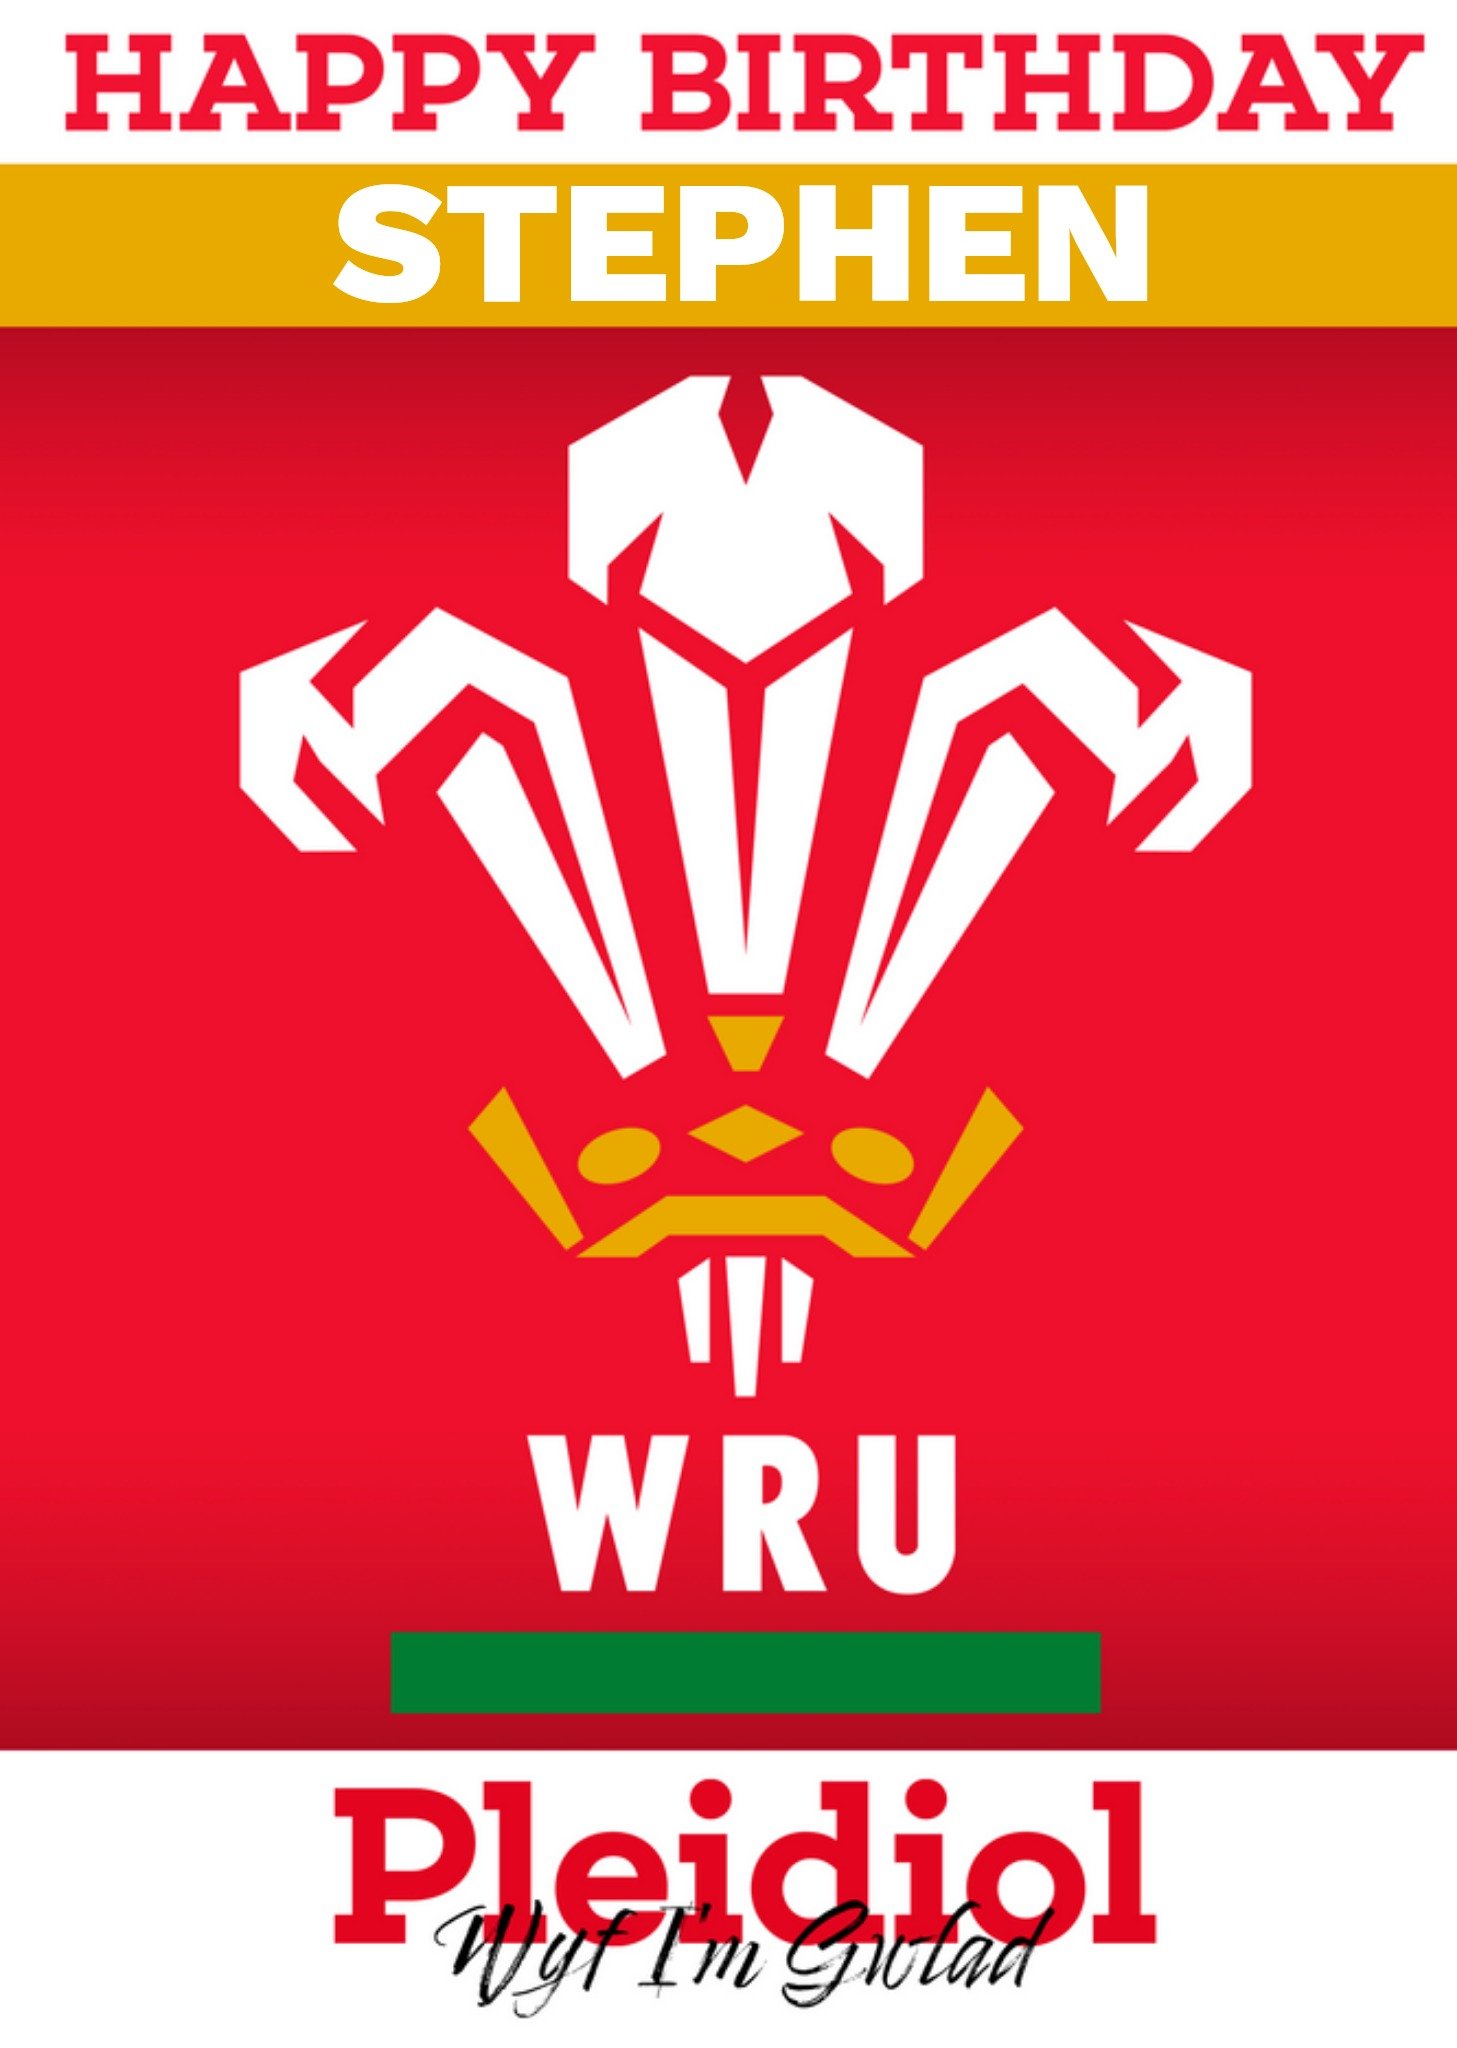 Welsh Rugby Union Badge Birthday Card, Large